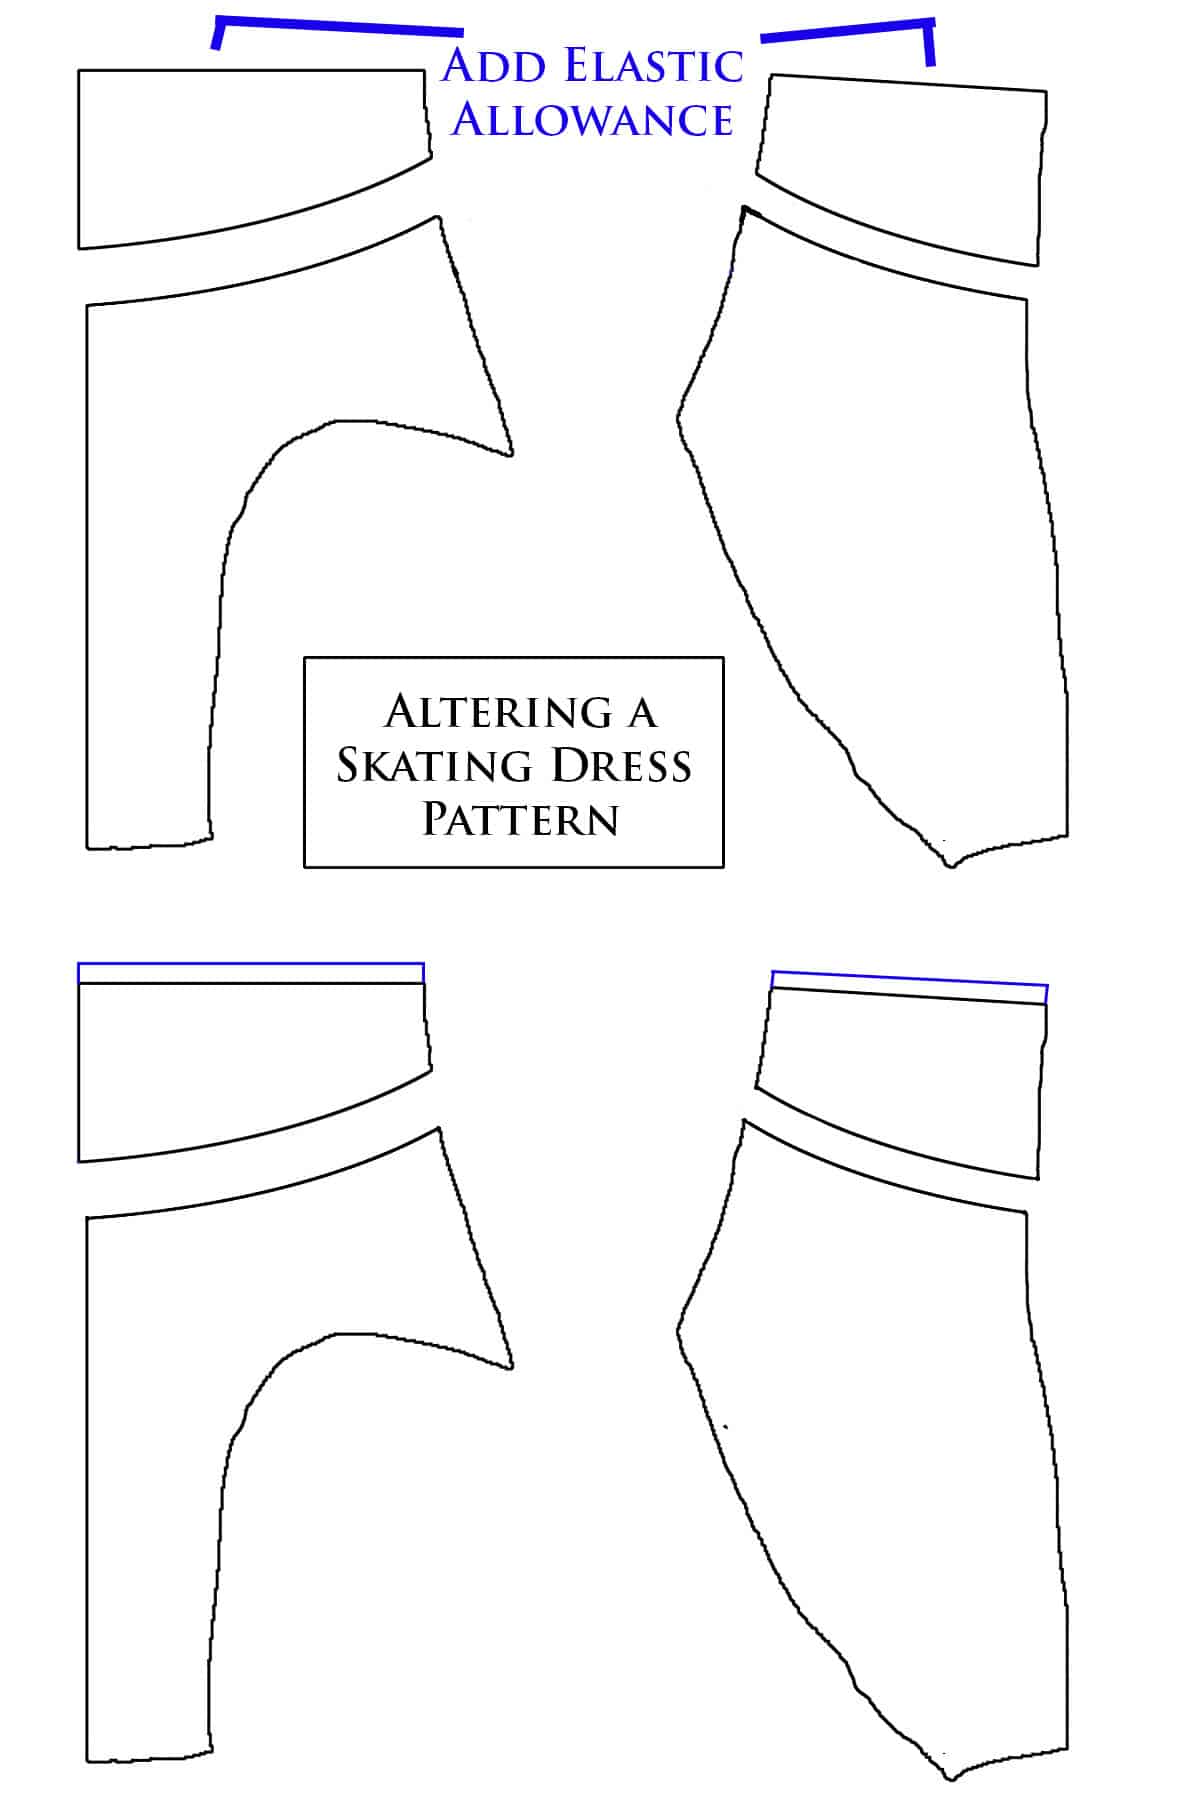 A diagram showing the elastic allowance being added to the new waist of the adapted dress pattern.